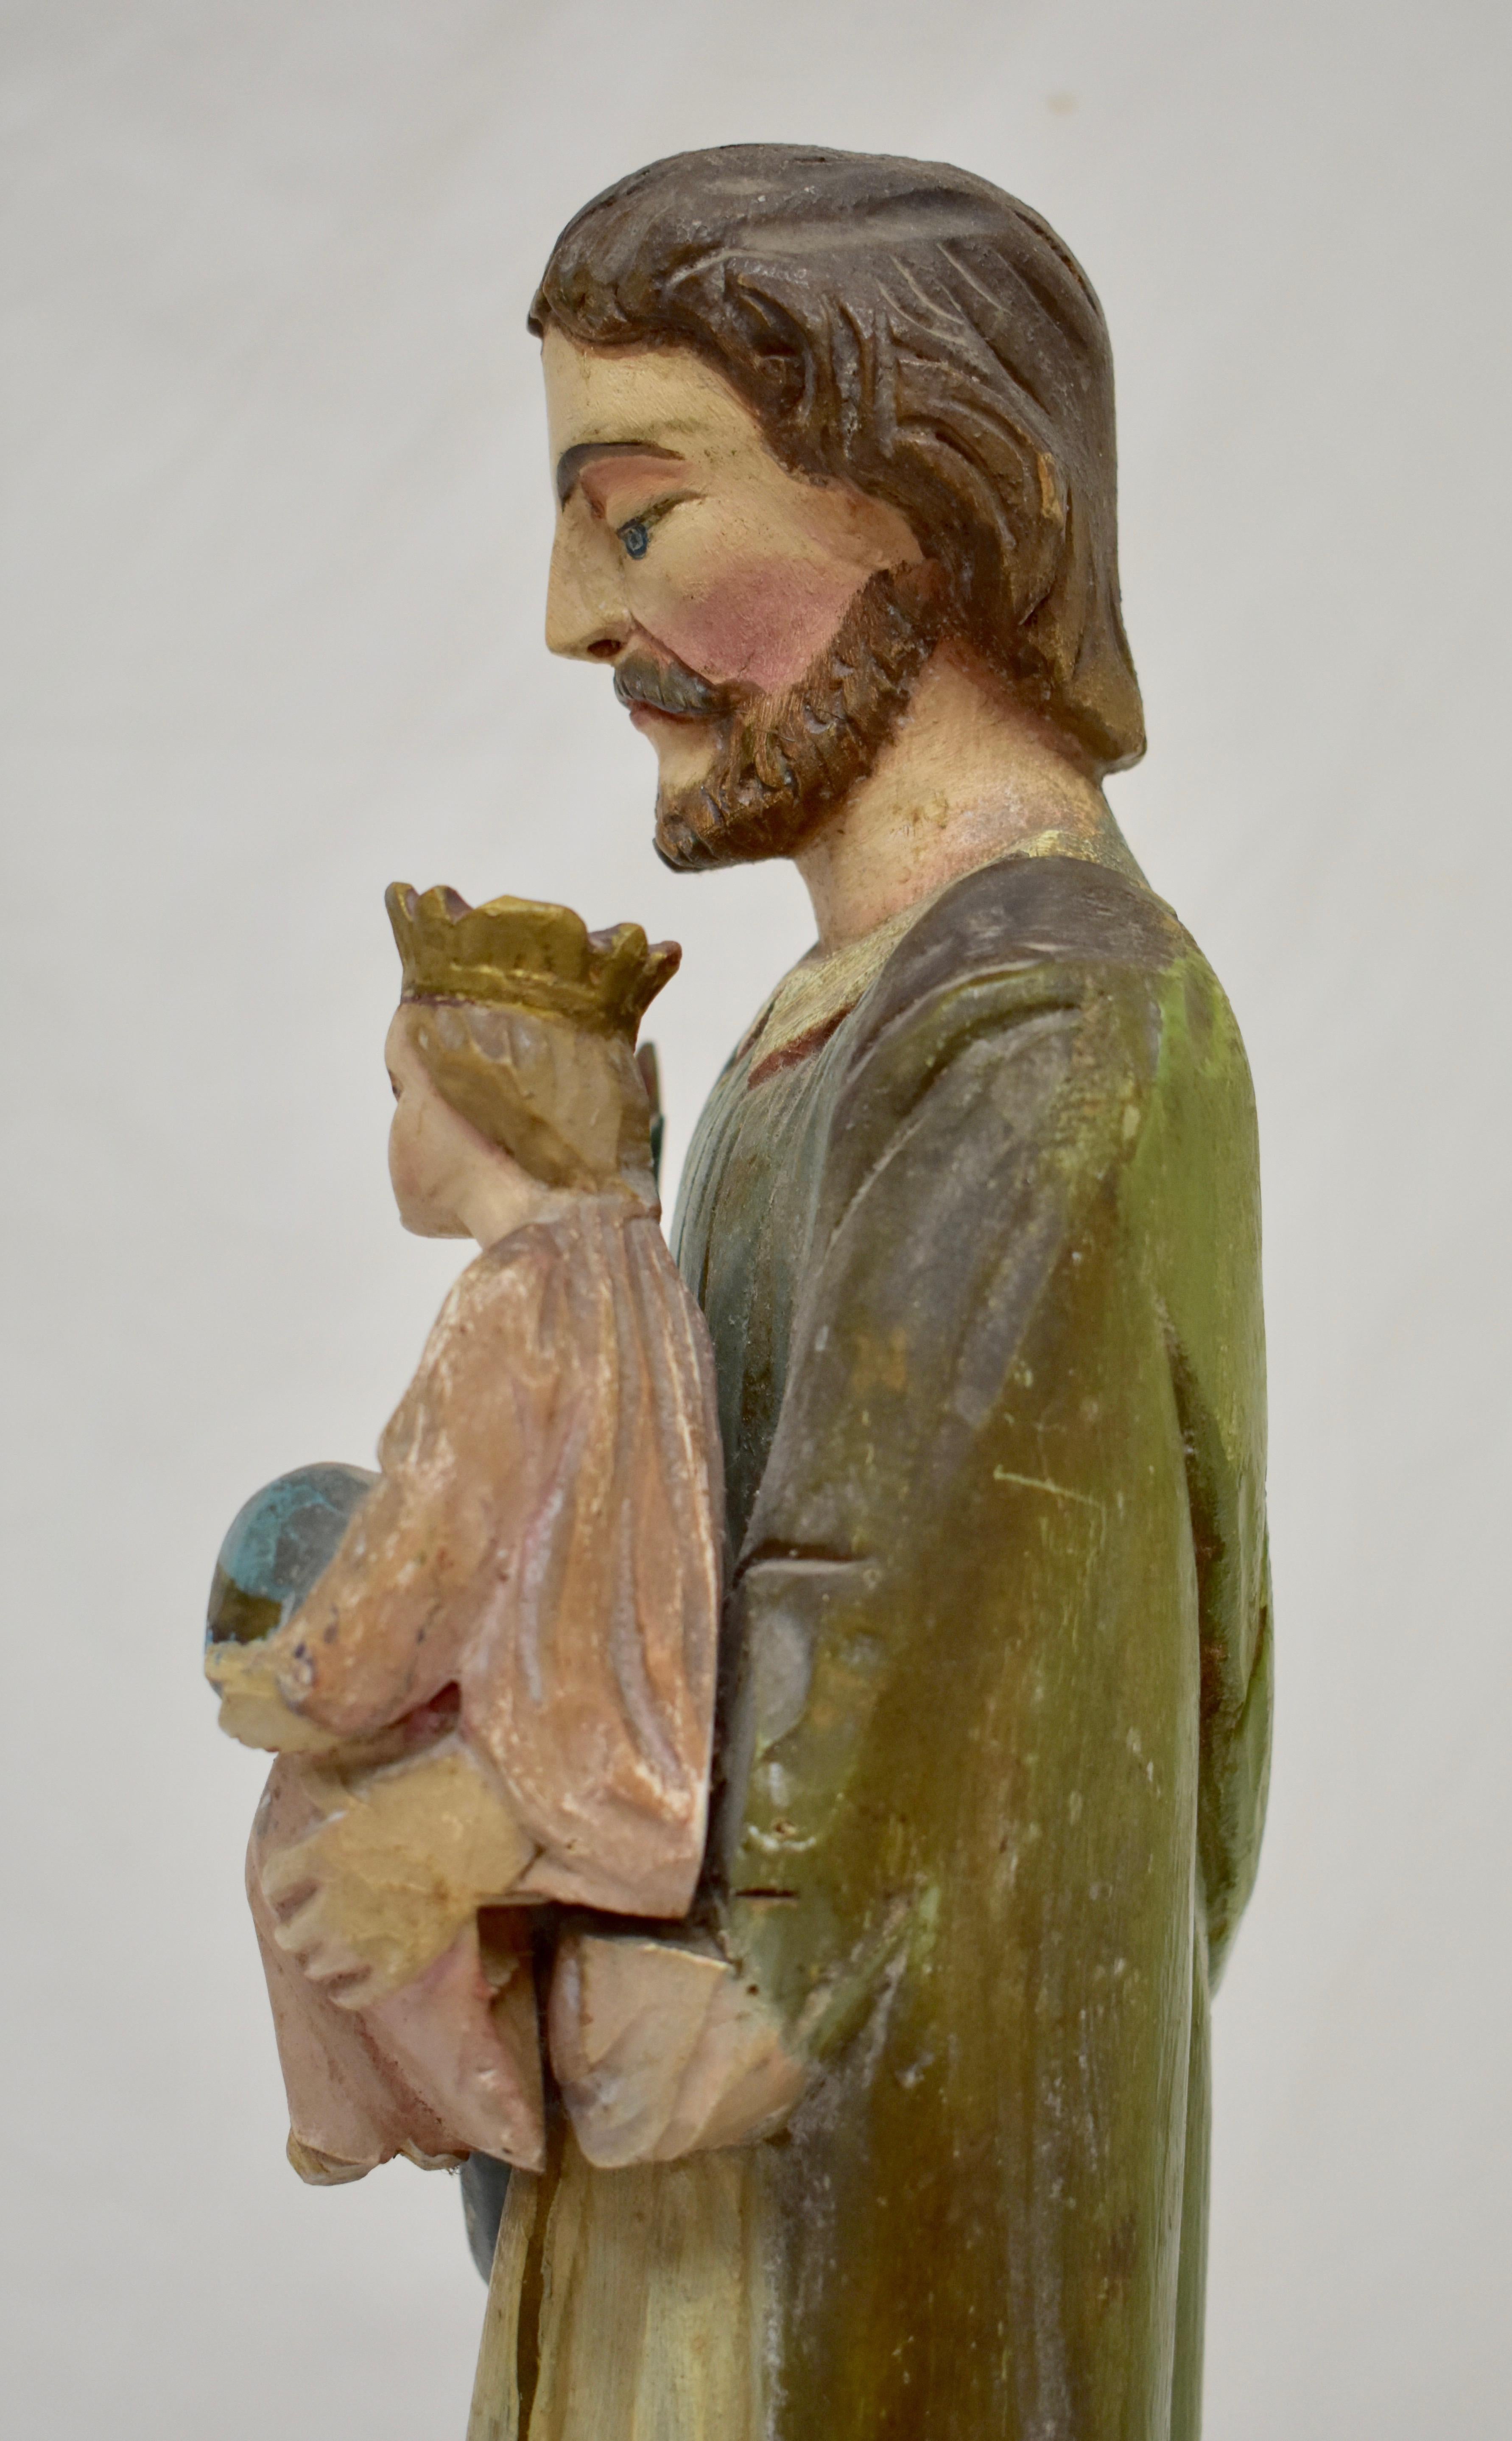 Hand Carved Wooden Sculpture of Saint Joseph with Baby Jesus 4